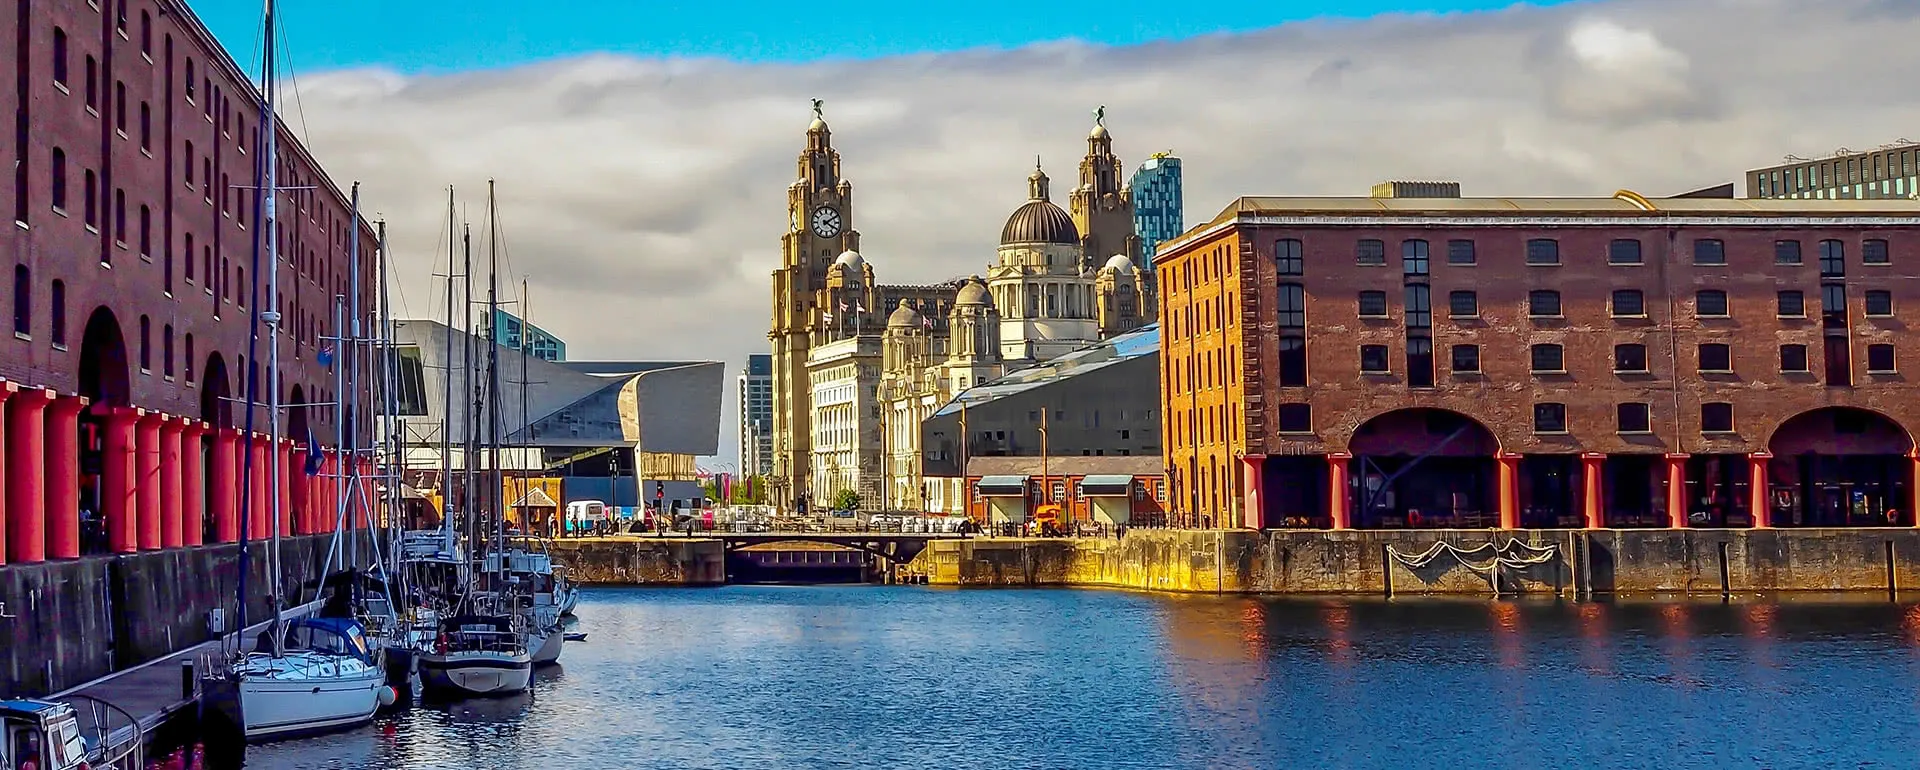 Meeting and conference location Liverpool